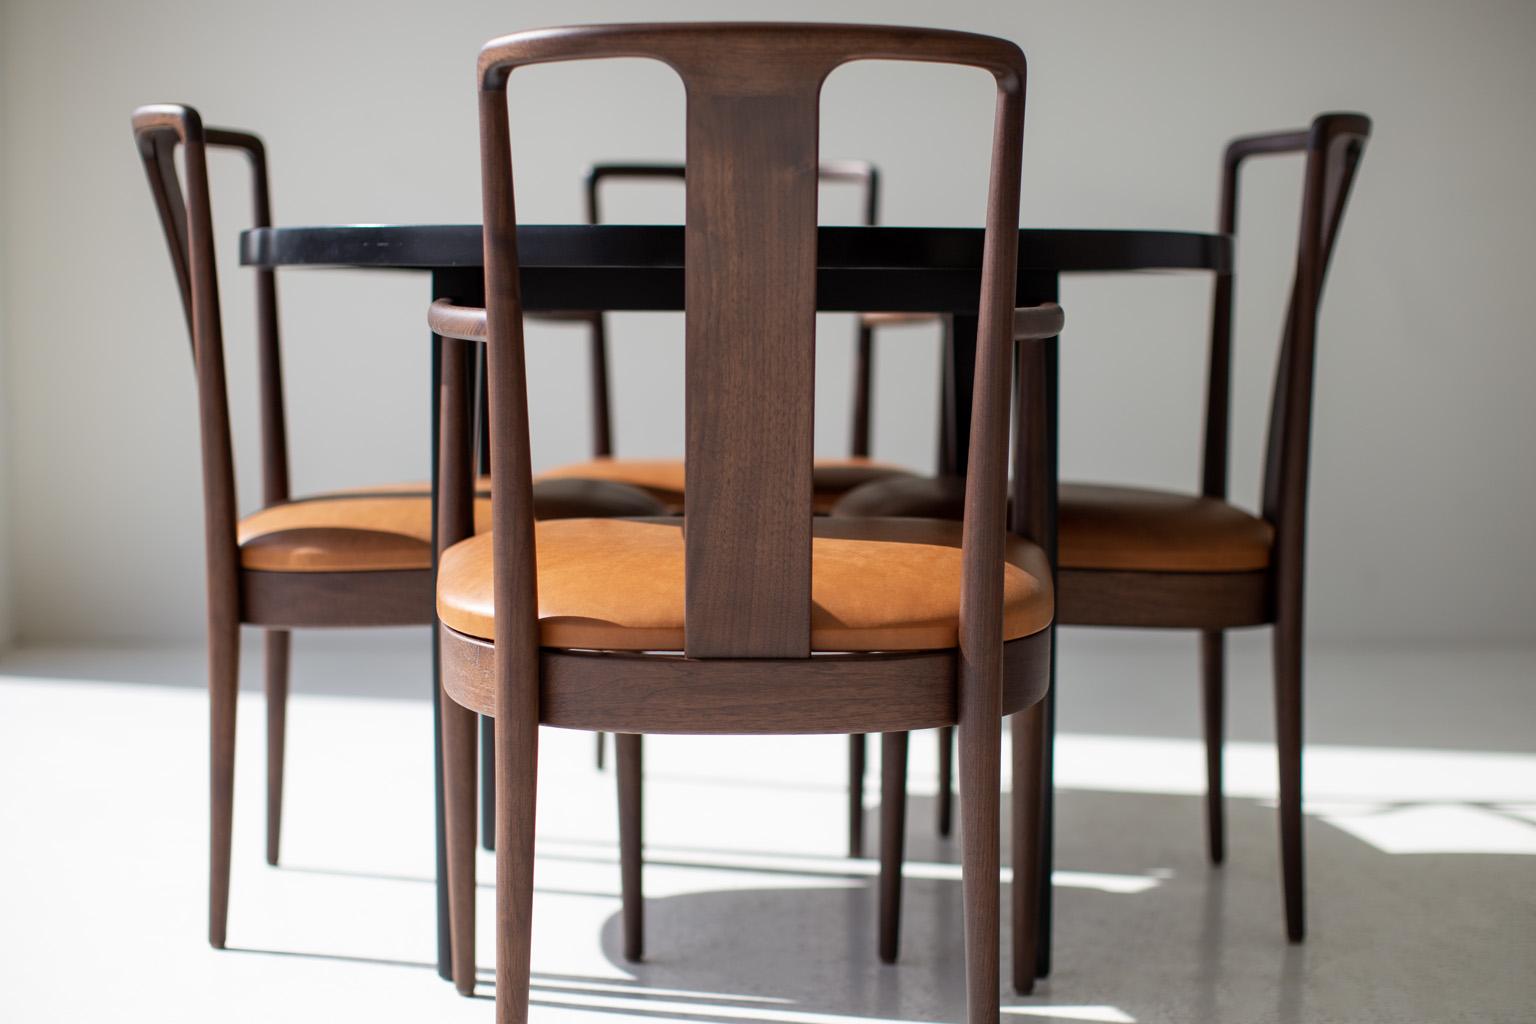 Derby Dining Chairs, Modern Dining Armchair, Peabody, Walnut, Leather, Craft In New Condition For Sale In Oak Harbor, OH